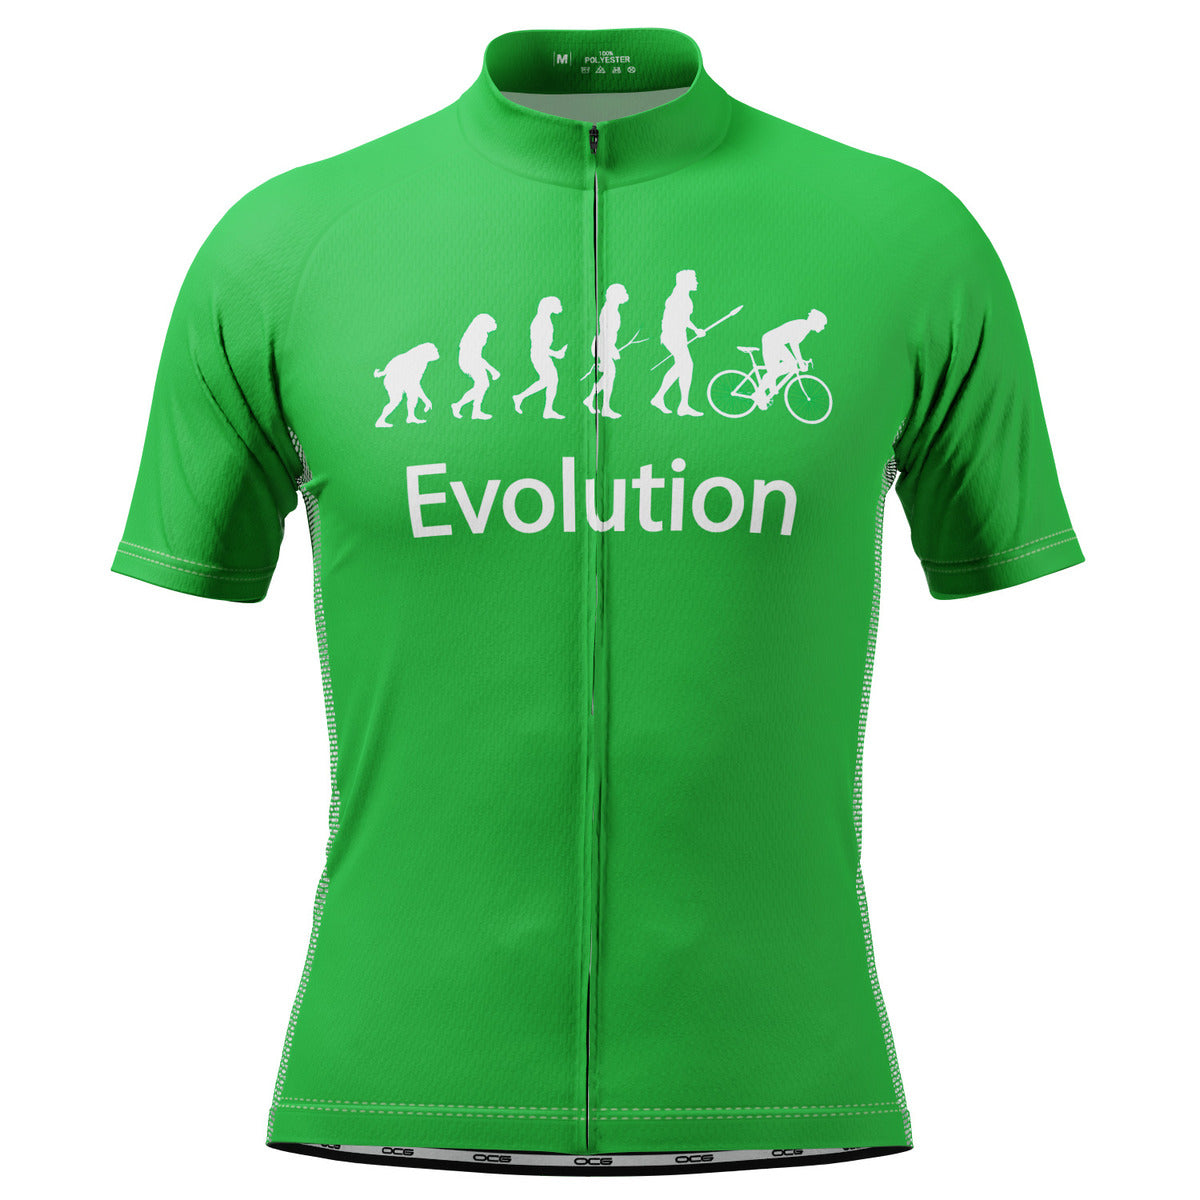 Men's Evolution of Man Short Sleeve Cycling Jersey [clearance]